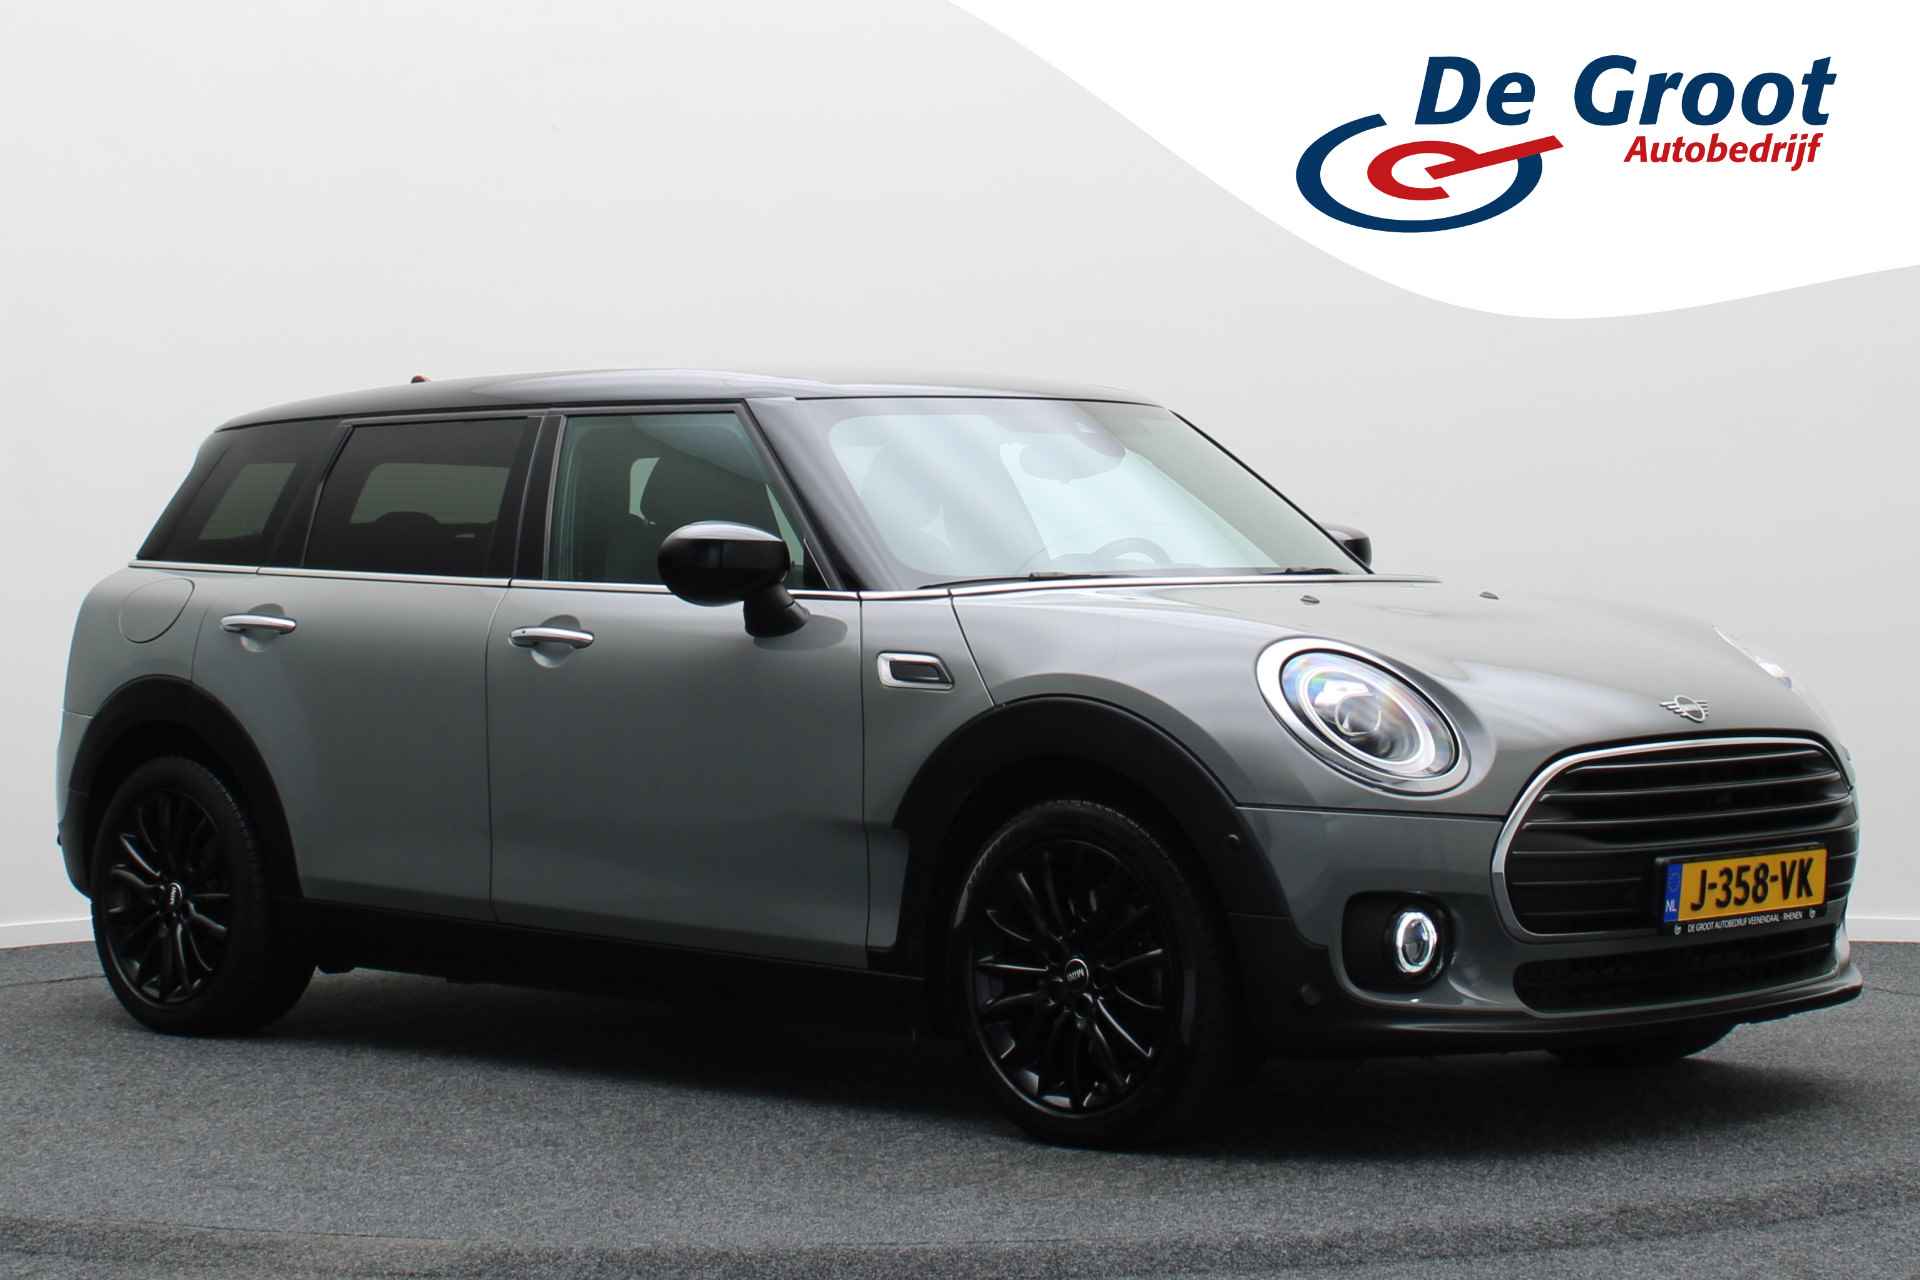 MINI Clubman 1.5 Cooper Business Edition Automaat LED, Keyless, Two-Tone lak, Navigatie, Cruise, PDC, Climate, 17” - 1/44